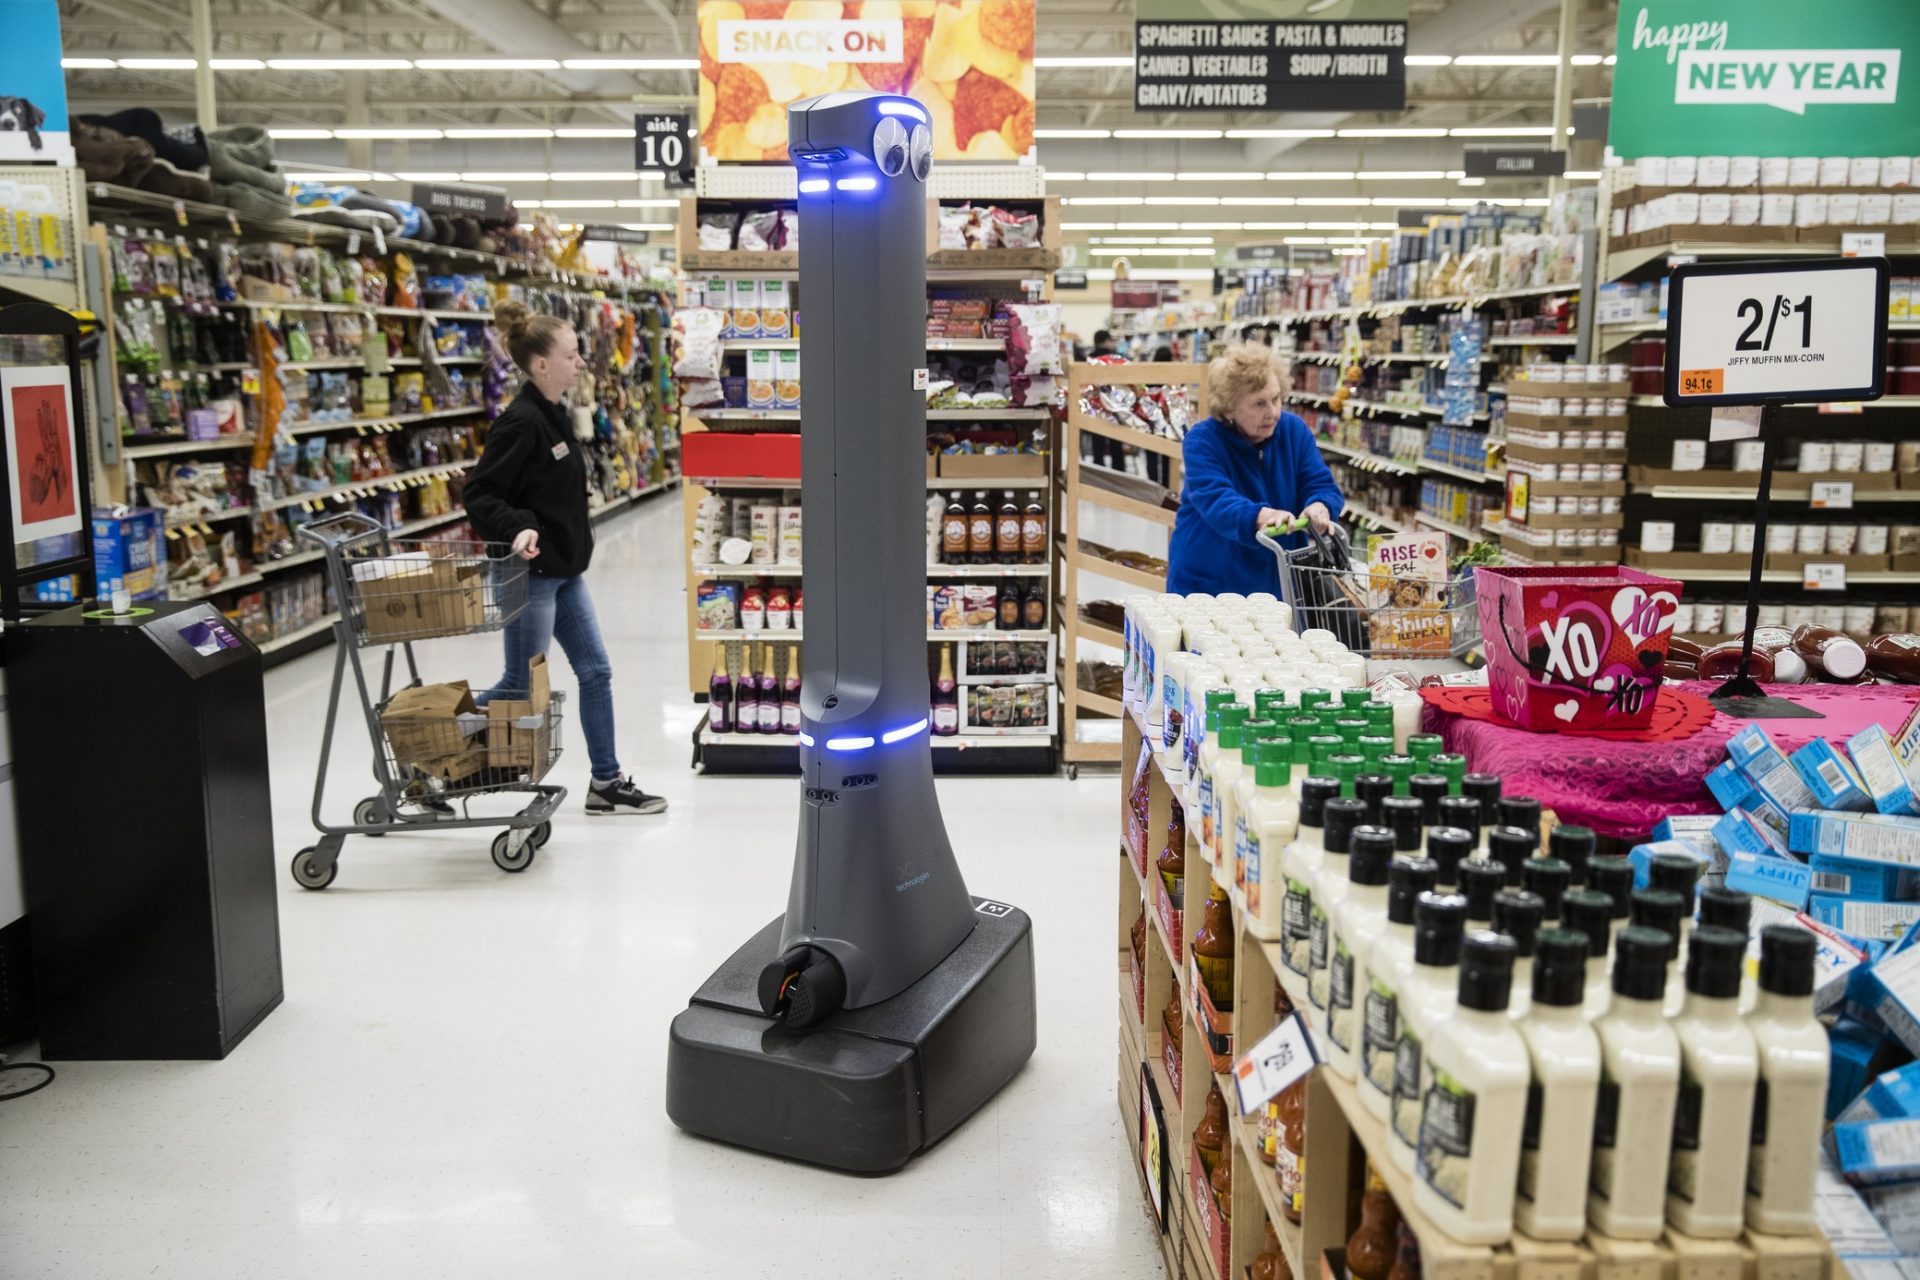 A robot named Marty cleans the floors at a Giant grocery story in Harrisburg, Pa., Tuesday, Jan. 15, 2019. On Monday, the Carlisle-based Giant Food Stores announced new robotic assistants will be arriving at all 172 Giant stores by the middle of this year. The chain's parent company says it plans to eventually deploy the robots to nearly 500 stores.